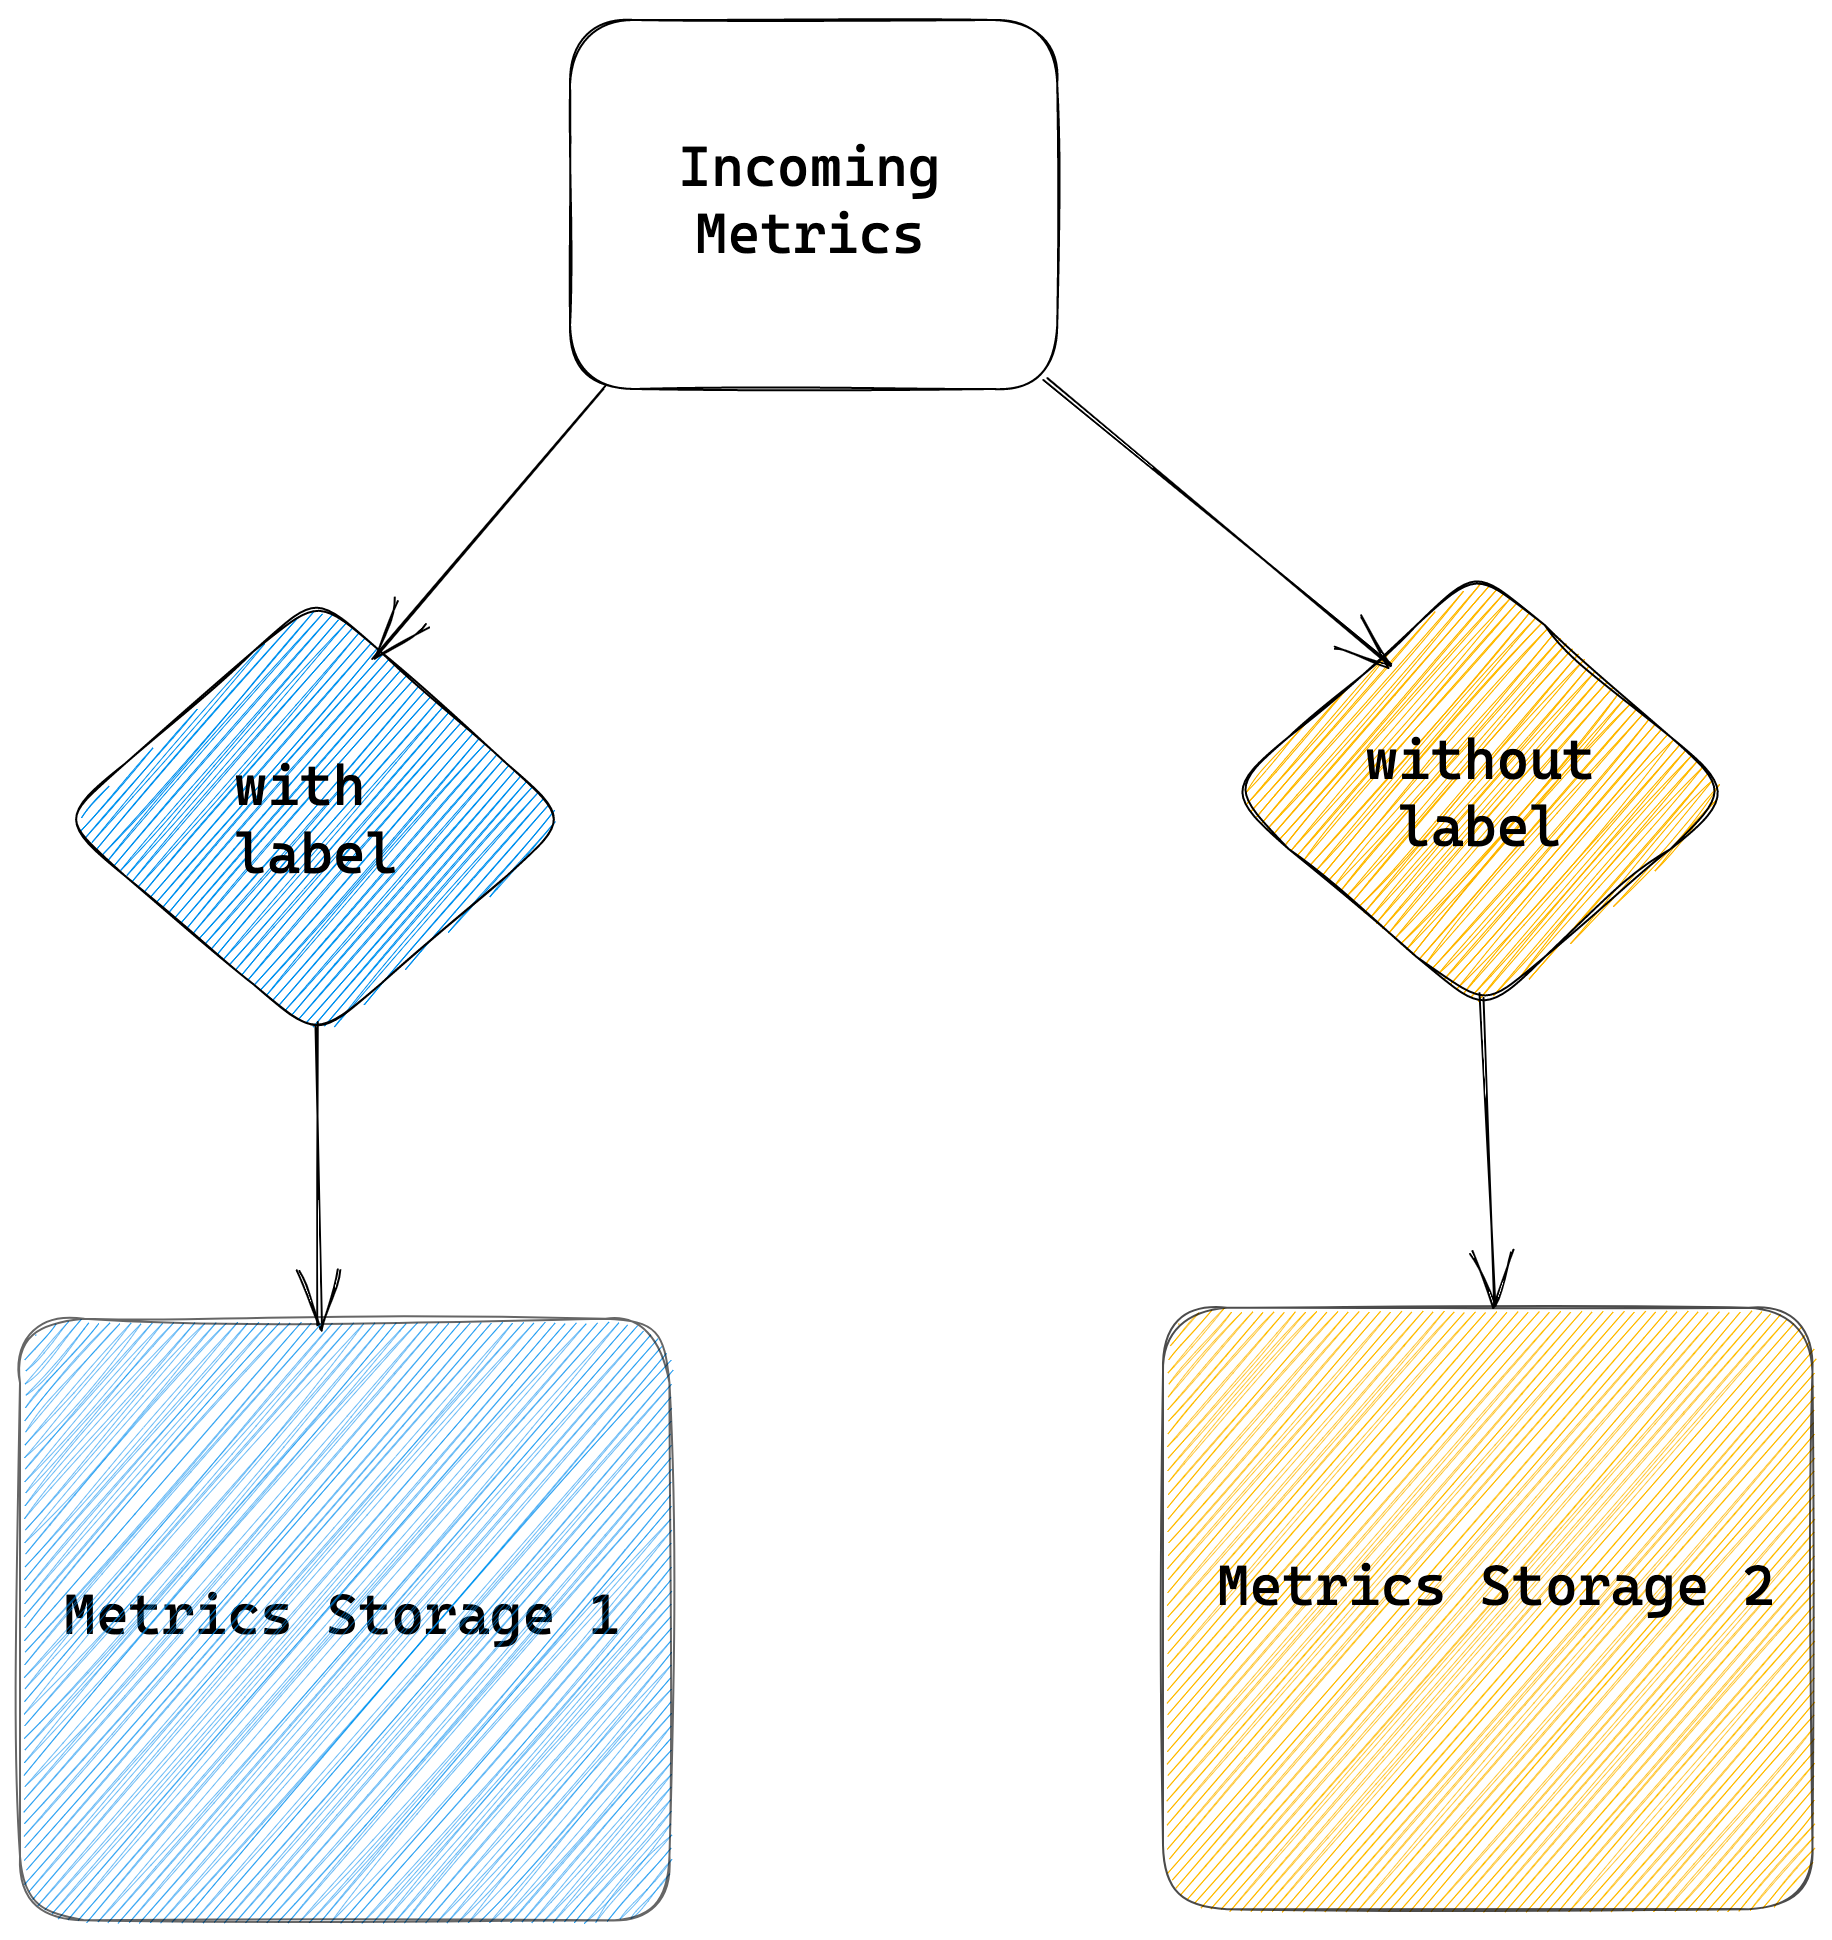 What we want: Filtering metrics by labels and sending them to two storage destinations